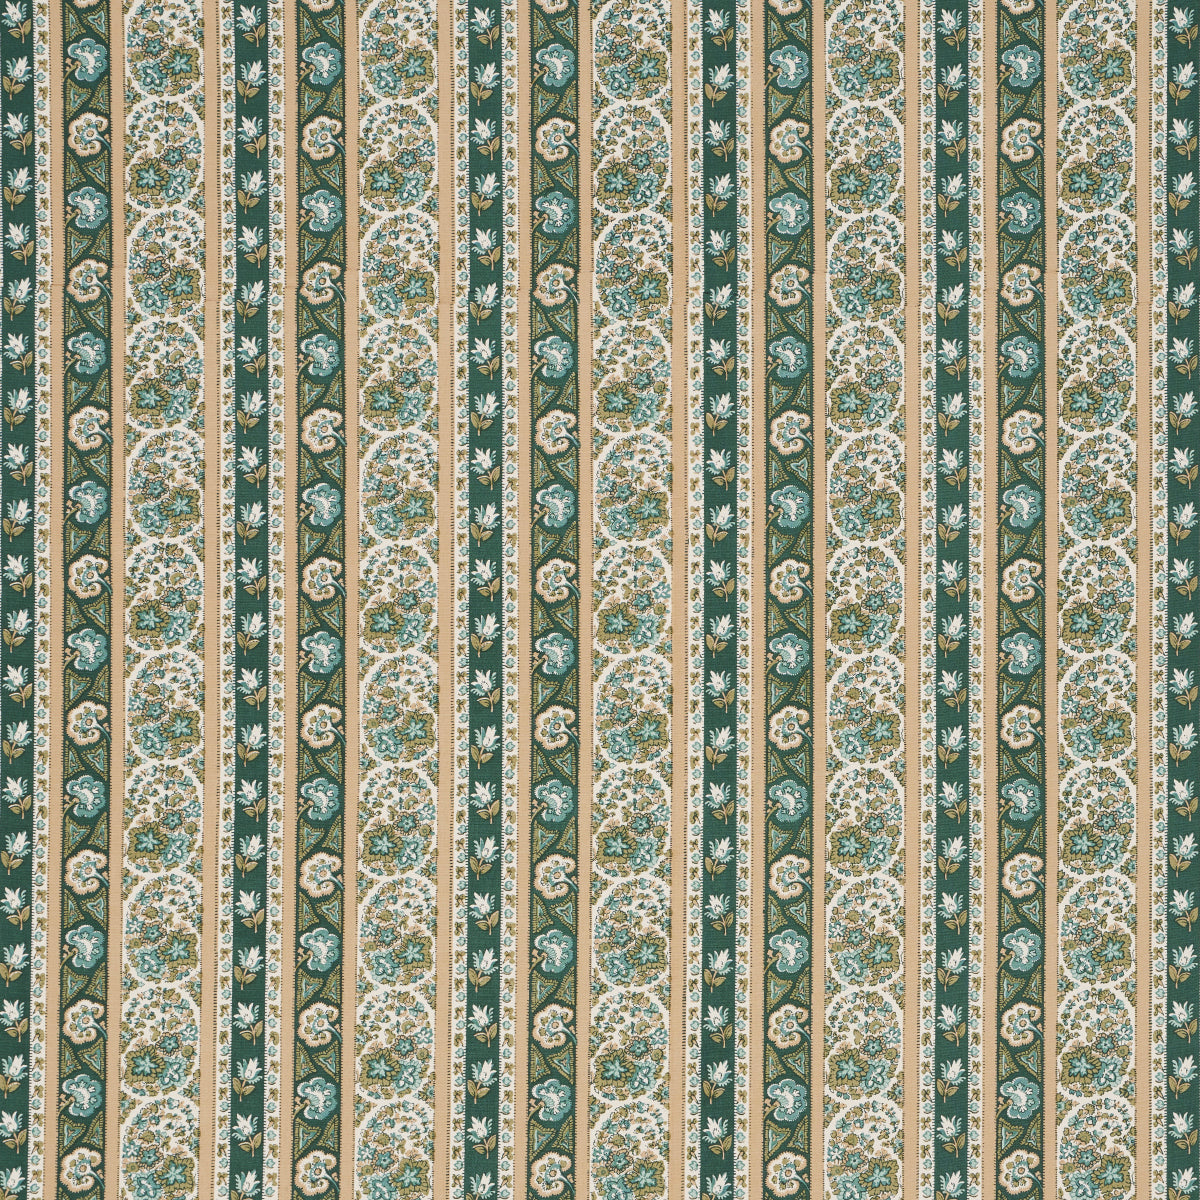 Purchase 181751 | Ines Paisley, Mineral & Teal - Schumacher Fabric